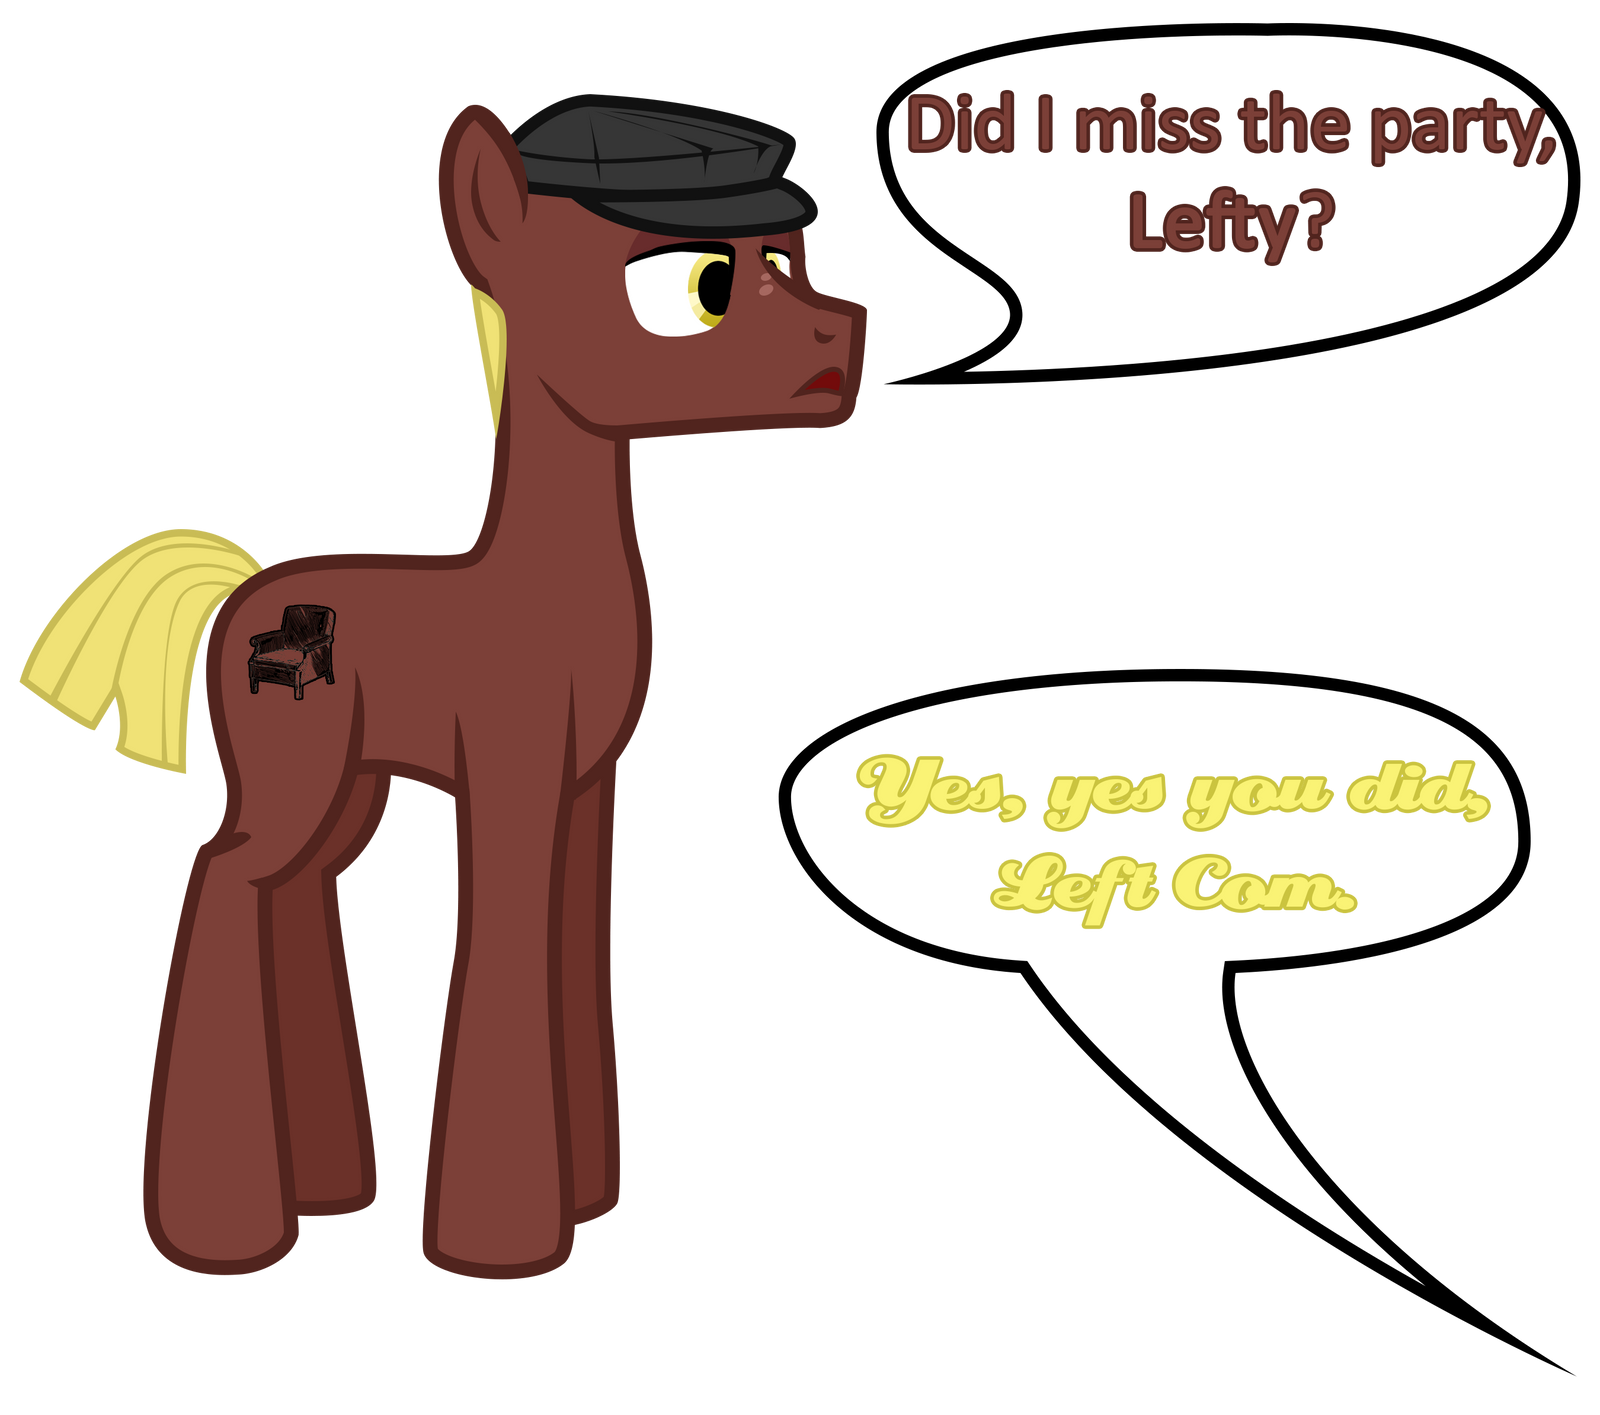 late_to_party_by_aaronmk-dbk8a3b.png